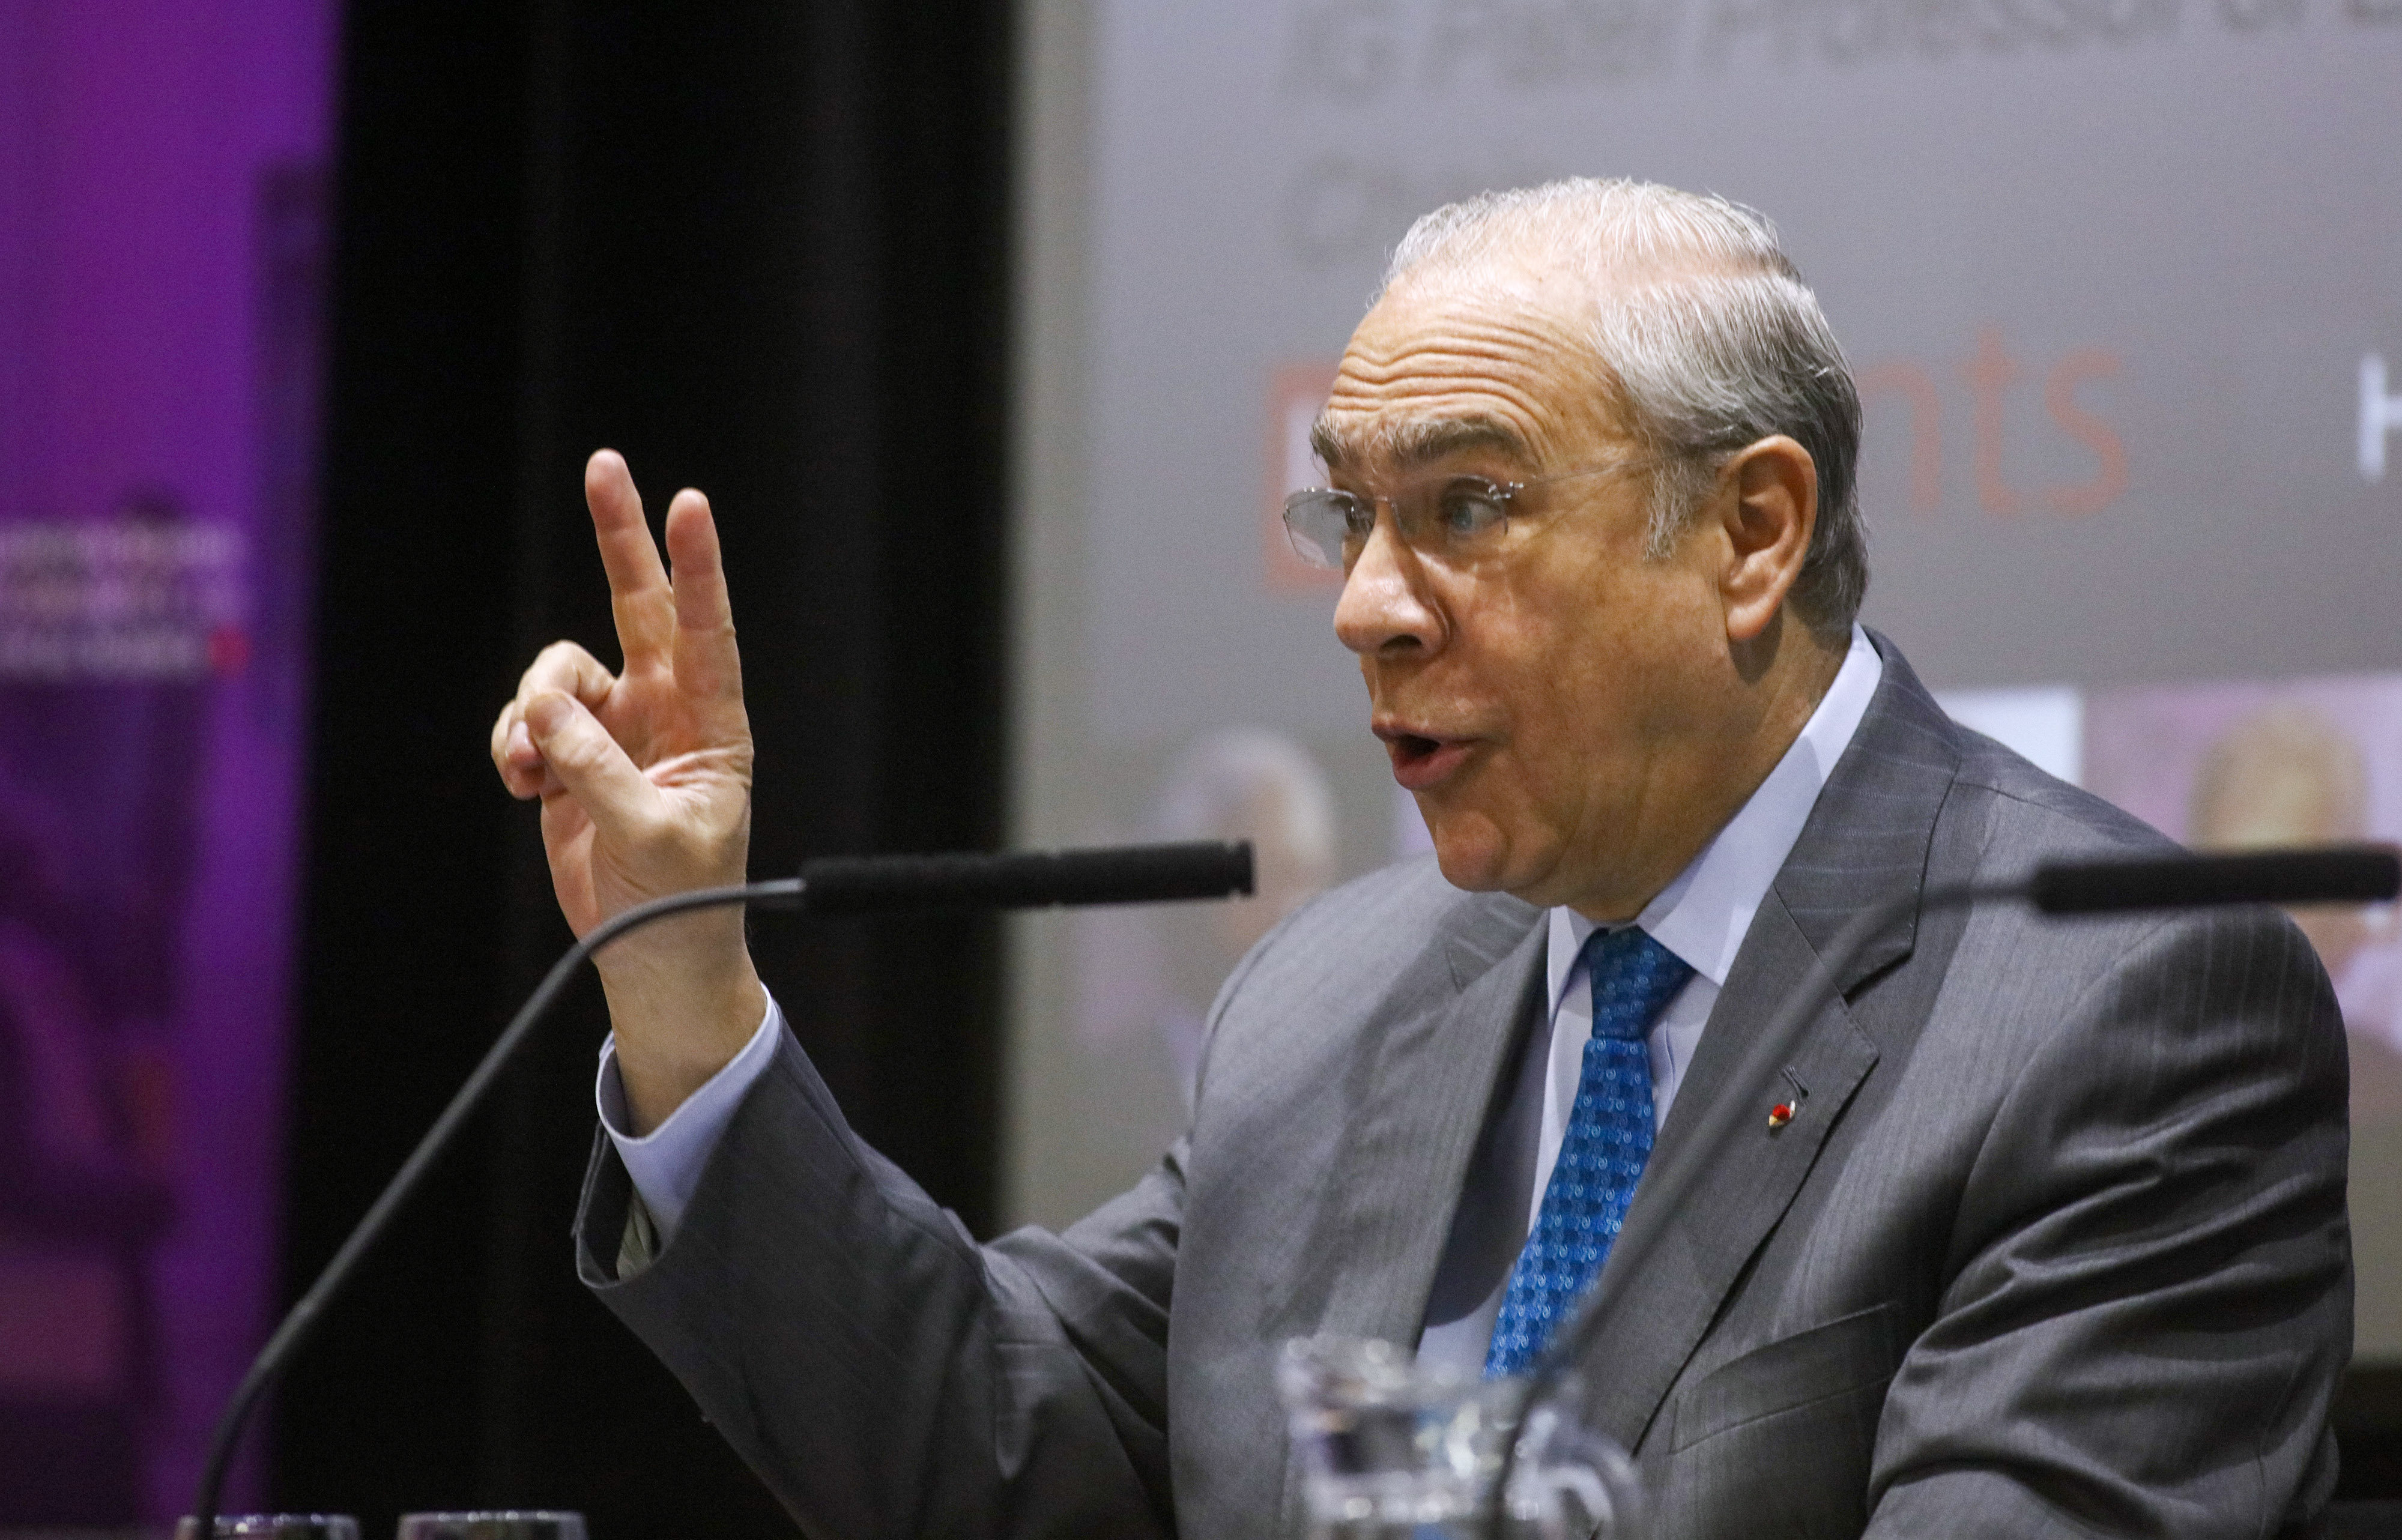 Jose Angel Gurria, secretary-general of the Organization for Economic Cooperation and Development (OECD), gestures while waiting to make a speech at the London School of Economics (LSE) in London, U.K., on Wednesday, April 27, 2016. The Organization for Economic Cooperation and Development became the latest international body to warn the U.K. that leaving the European Union would cause lasting damage to the economy, earning rebukes from campaigners for a so-called Brexit. (Bloomberg—Bloomberg via Getty Images)